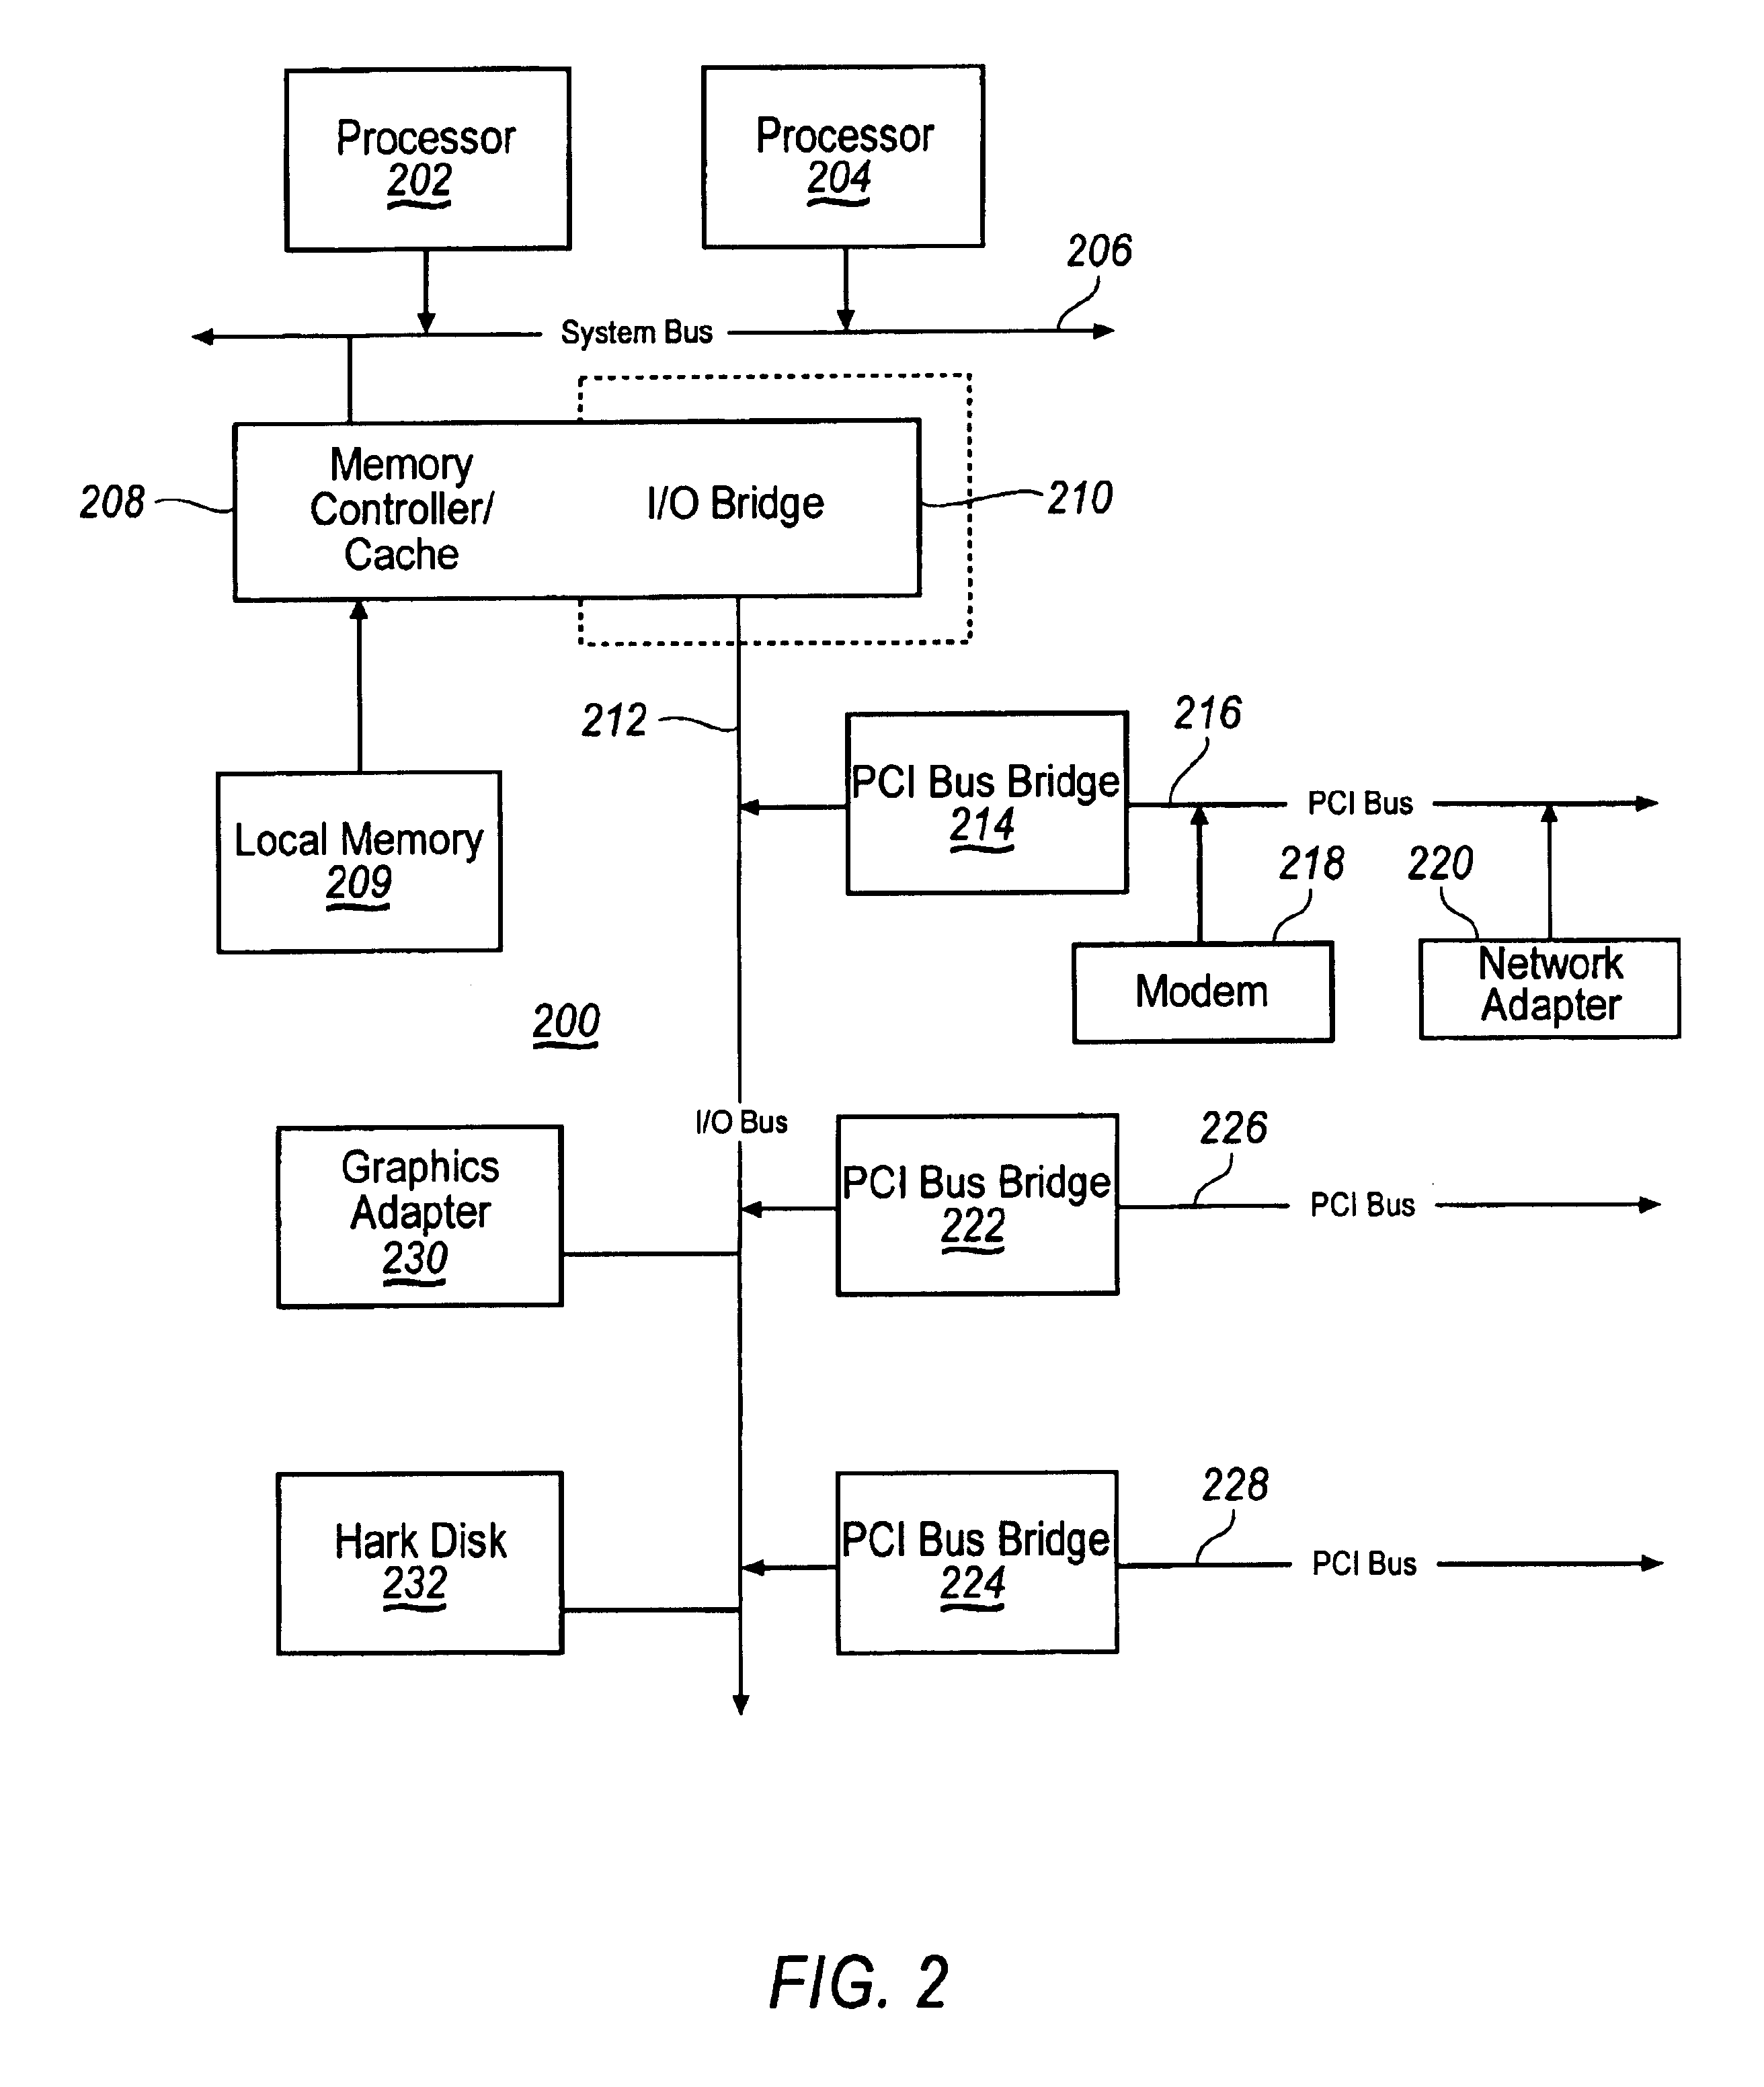 Method and apparatus for providing web-based assistance to customers and service representatives